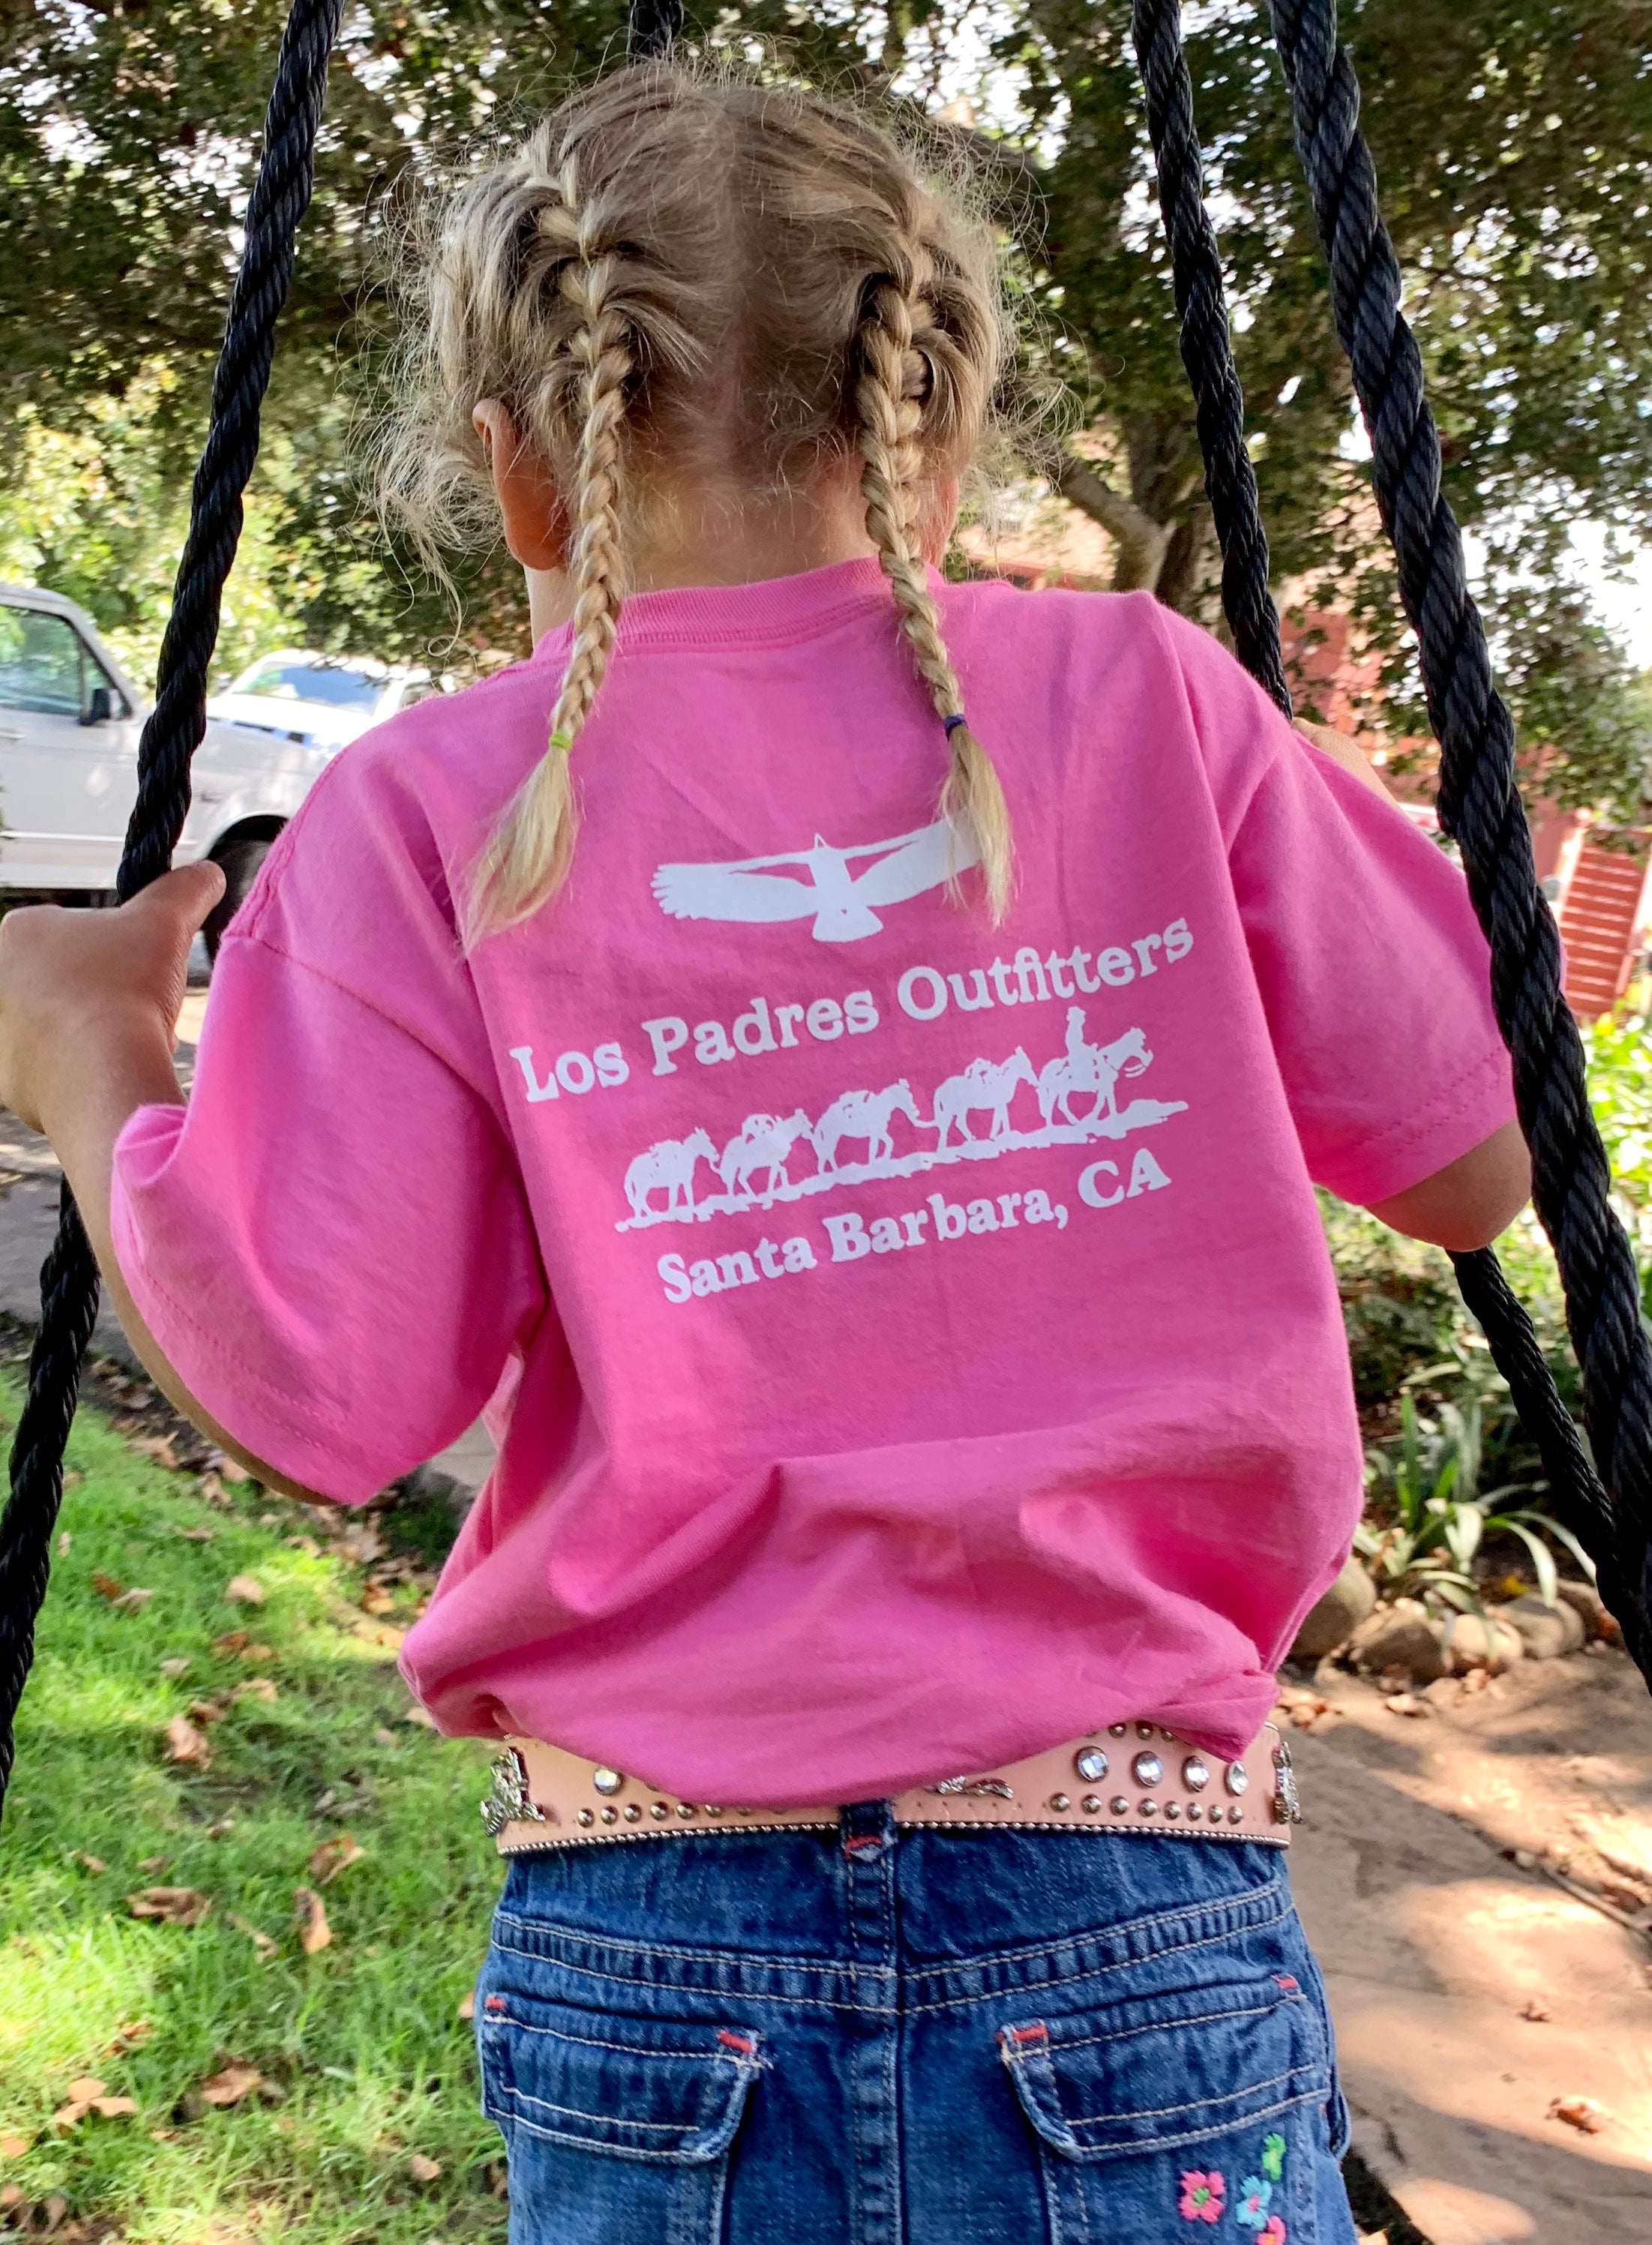 Back view of little girl outside wearing the comfortable pink cotton Kids Short Sleeve Tee with the Los Padres Outfitters logo on the back